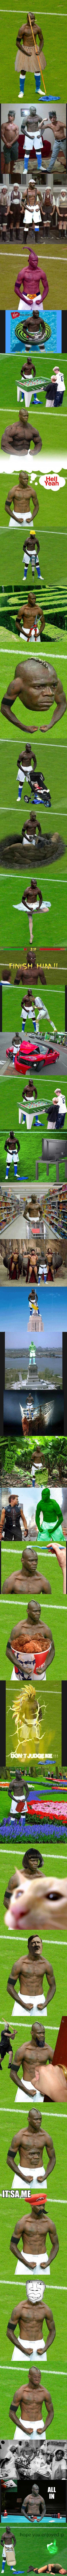 BALOTELLI+comp.+A+compilation+of+balotelli+s+meme+pics.+YFW+tags+are_73f1b6_3856297.jpg